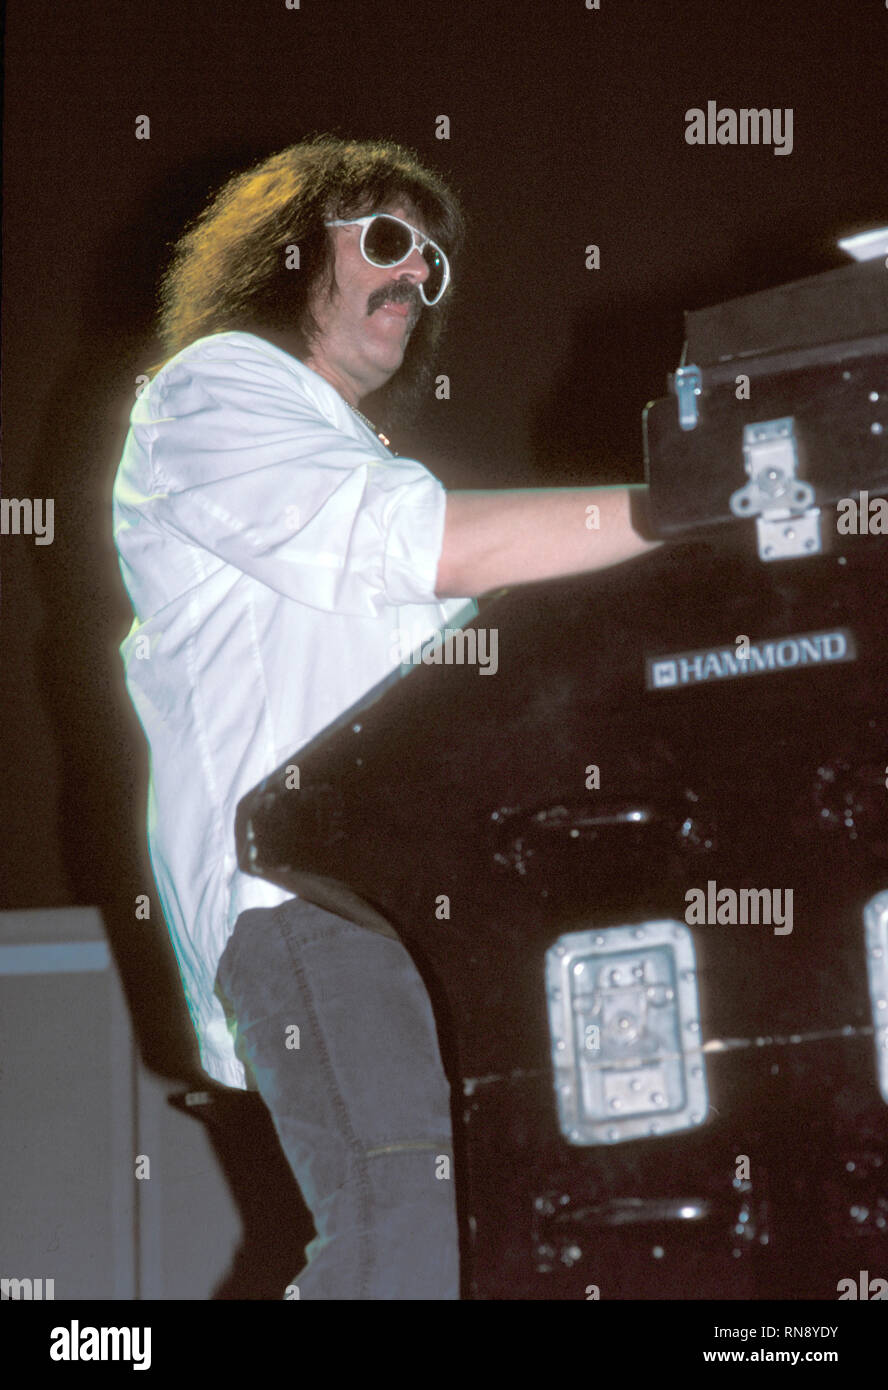 Deep Purple keyboardist Jon Lord is shown performing onstage during a 'live' concert appearance. Stock Photo